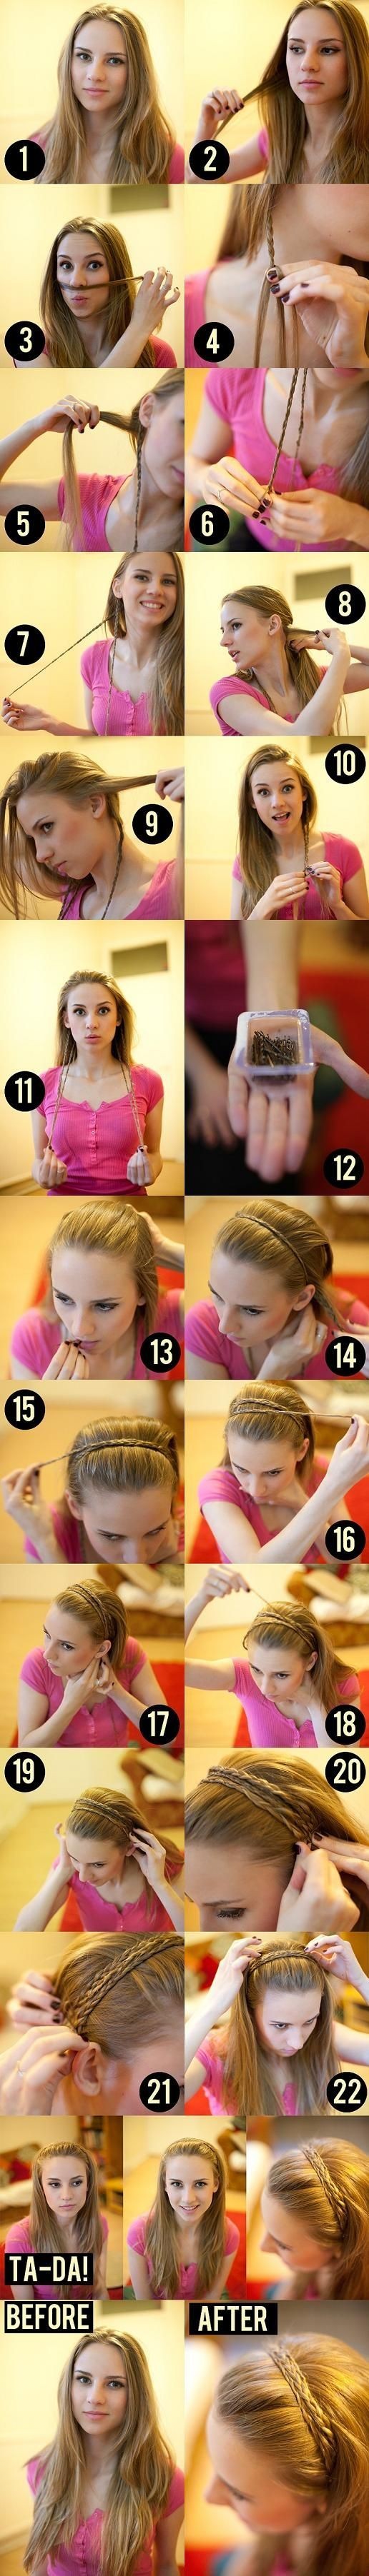 Braided hairstyle tutorial for vacation